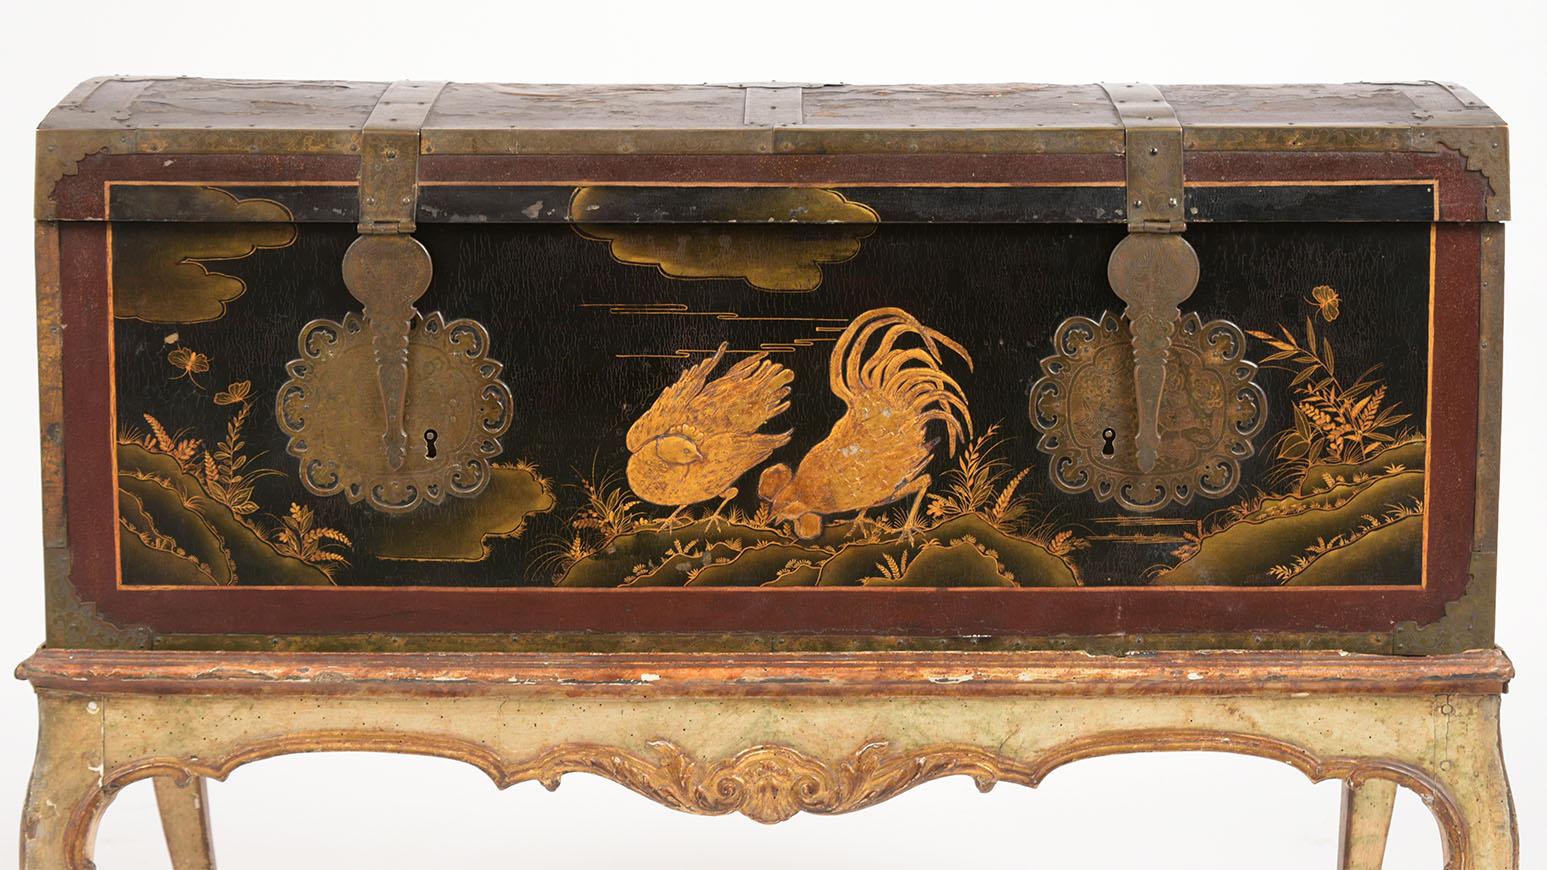 Rare Mid-19th century Spanish chinoiserie Trunk is in good condition and features the original hand carved scenes depicting pheasants and roosters on the top, front, and sides. The trunk has flat brass molding hinges and large key-plates all with